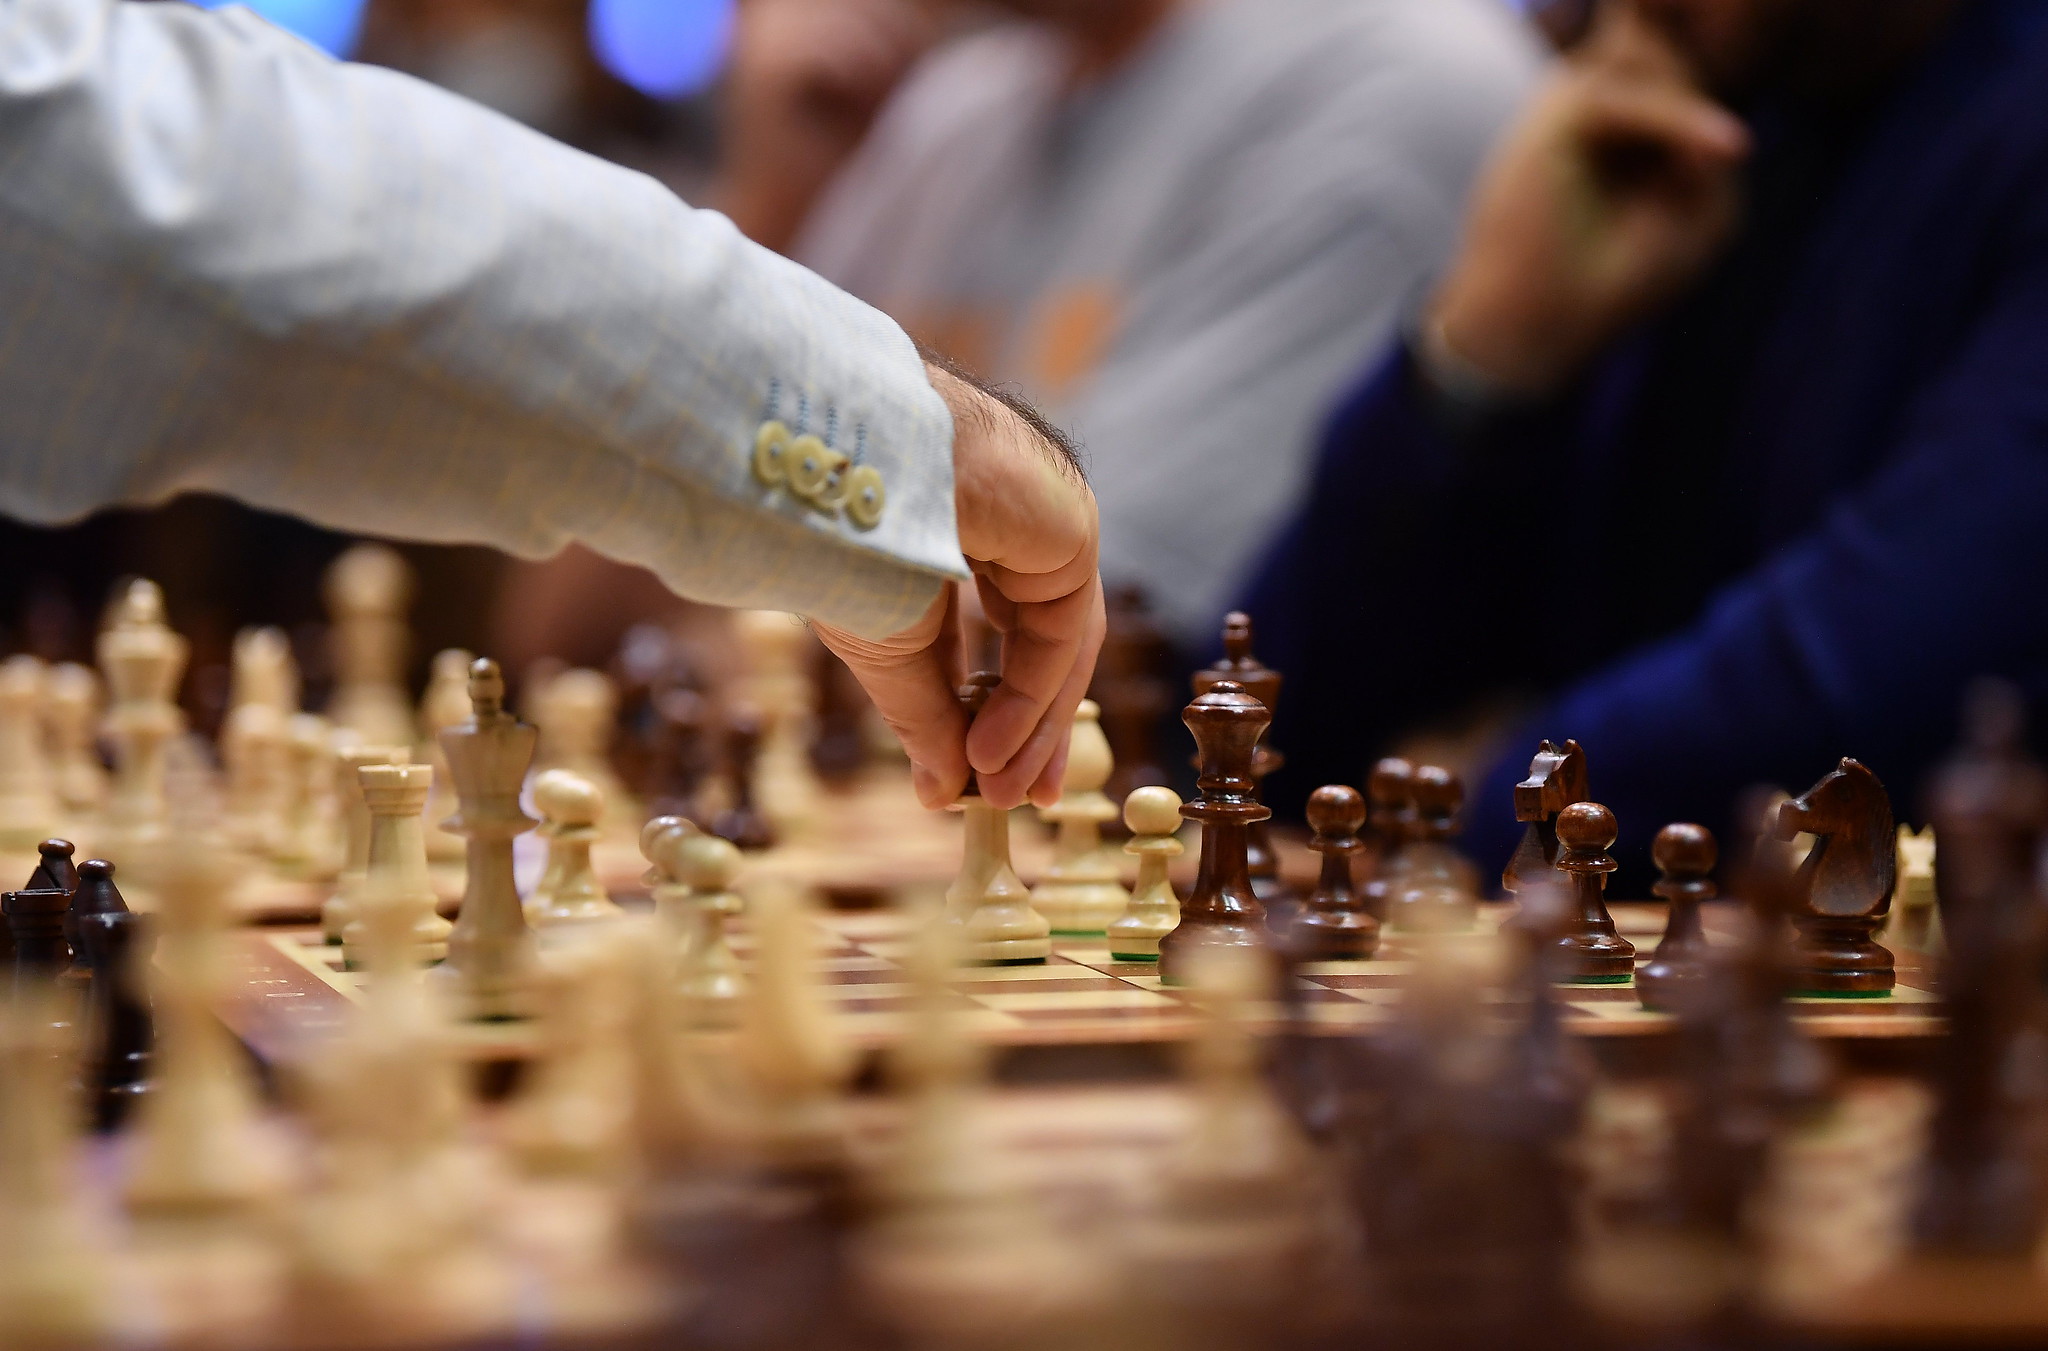 Close up of a game of chess with the focus on a hand holding the white queen in the centre of the board